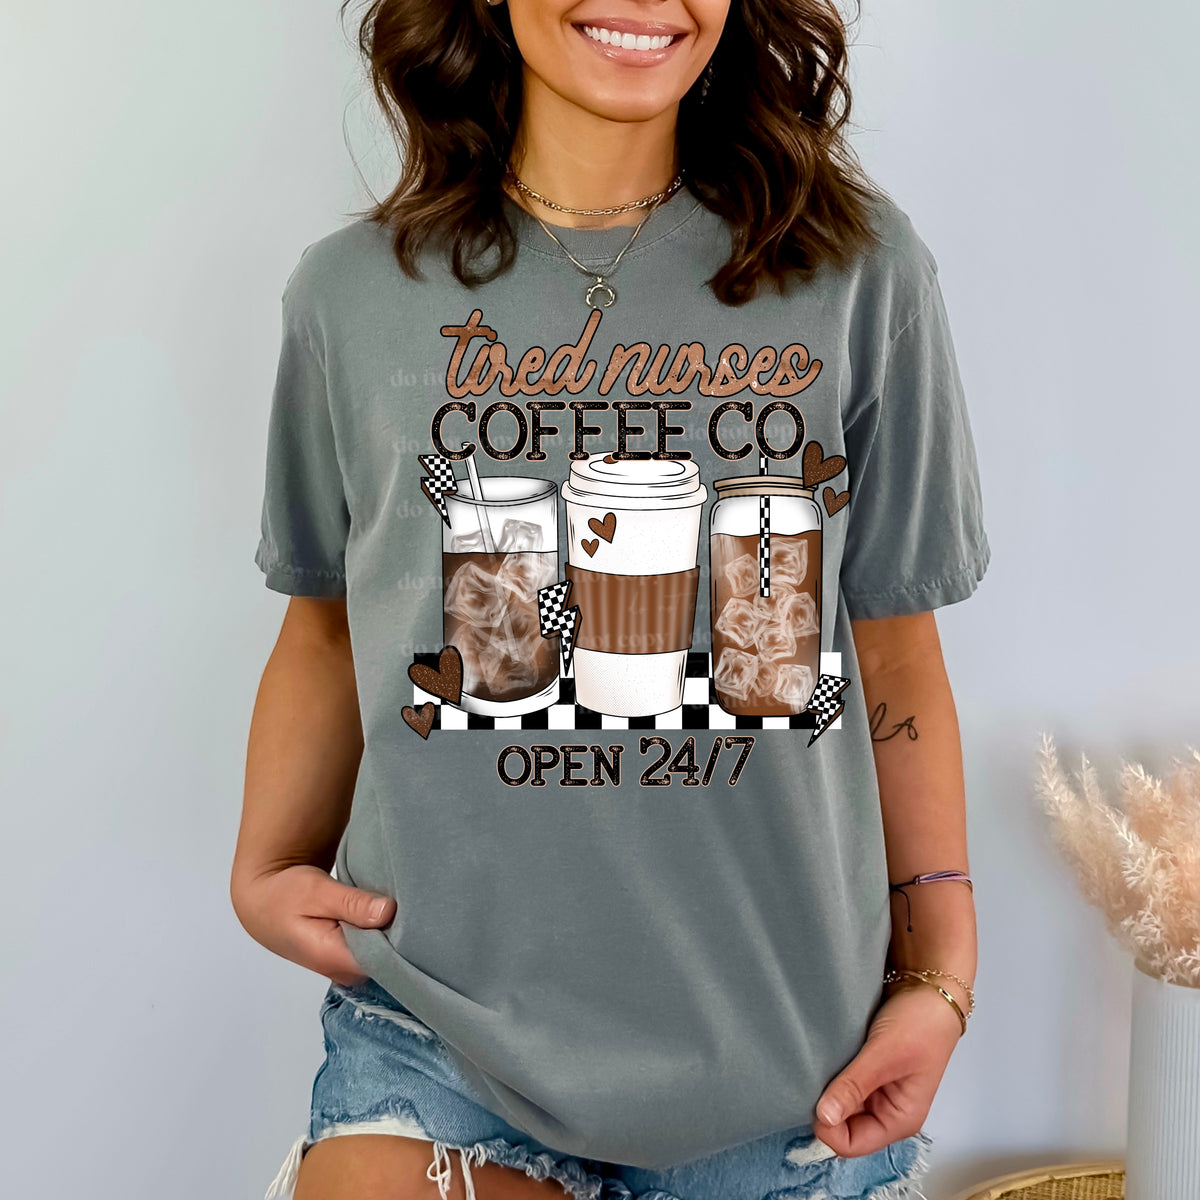 Tired nurses coffee co PNG